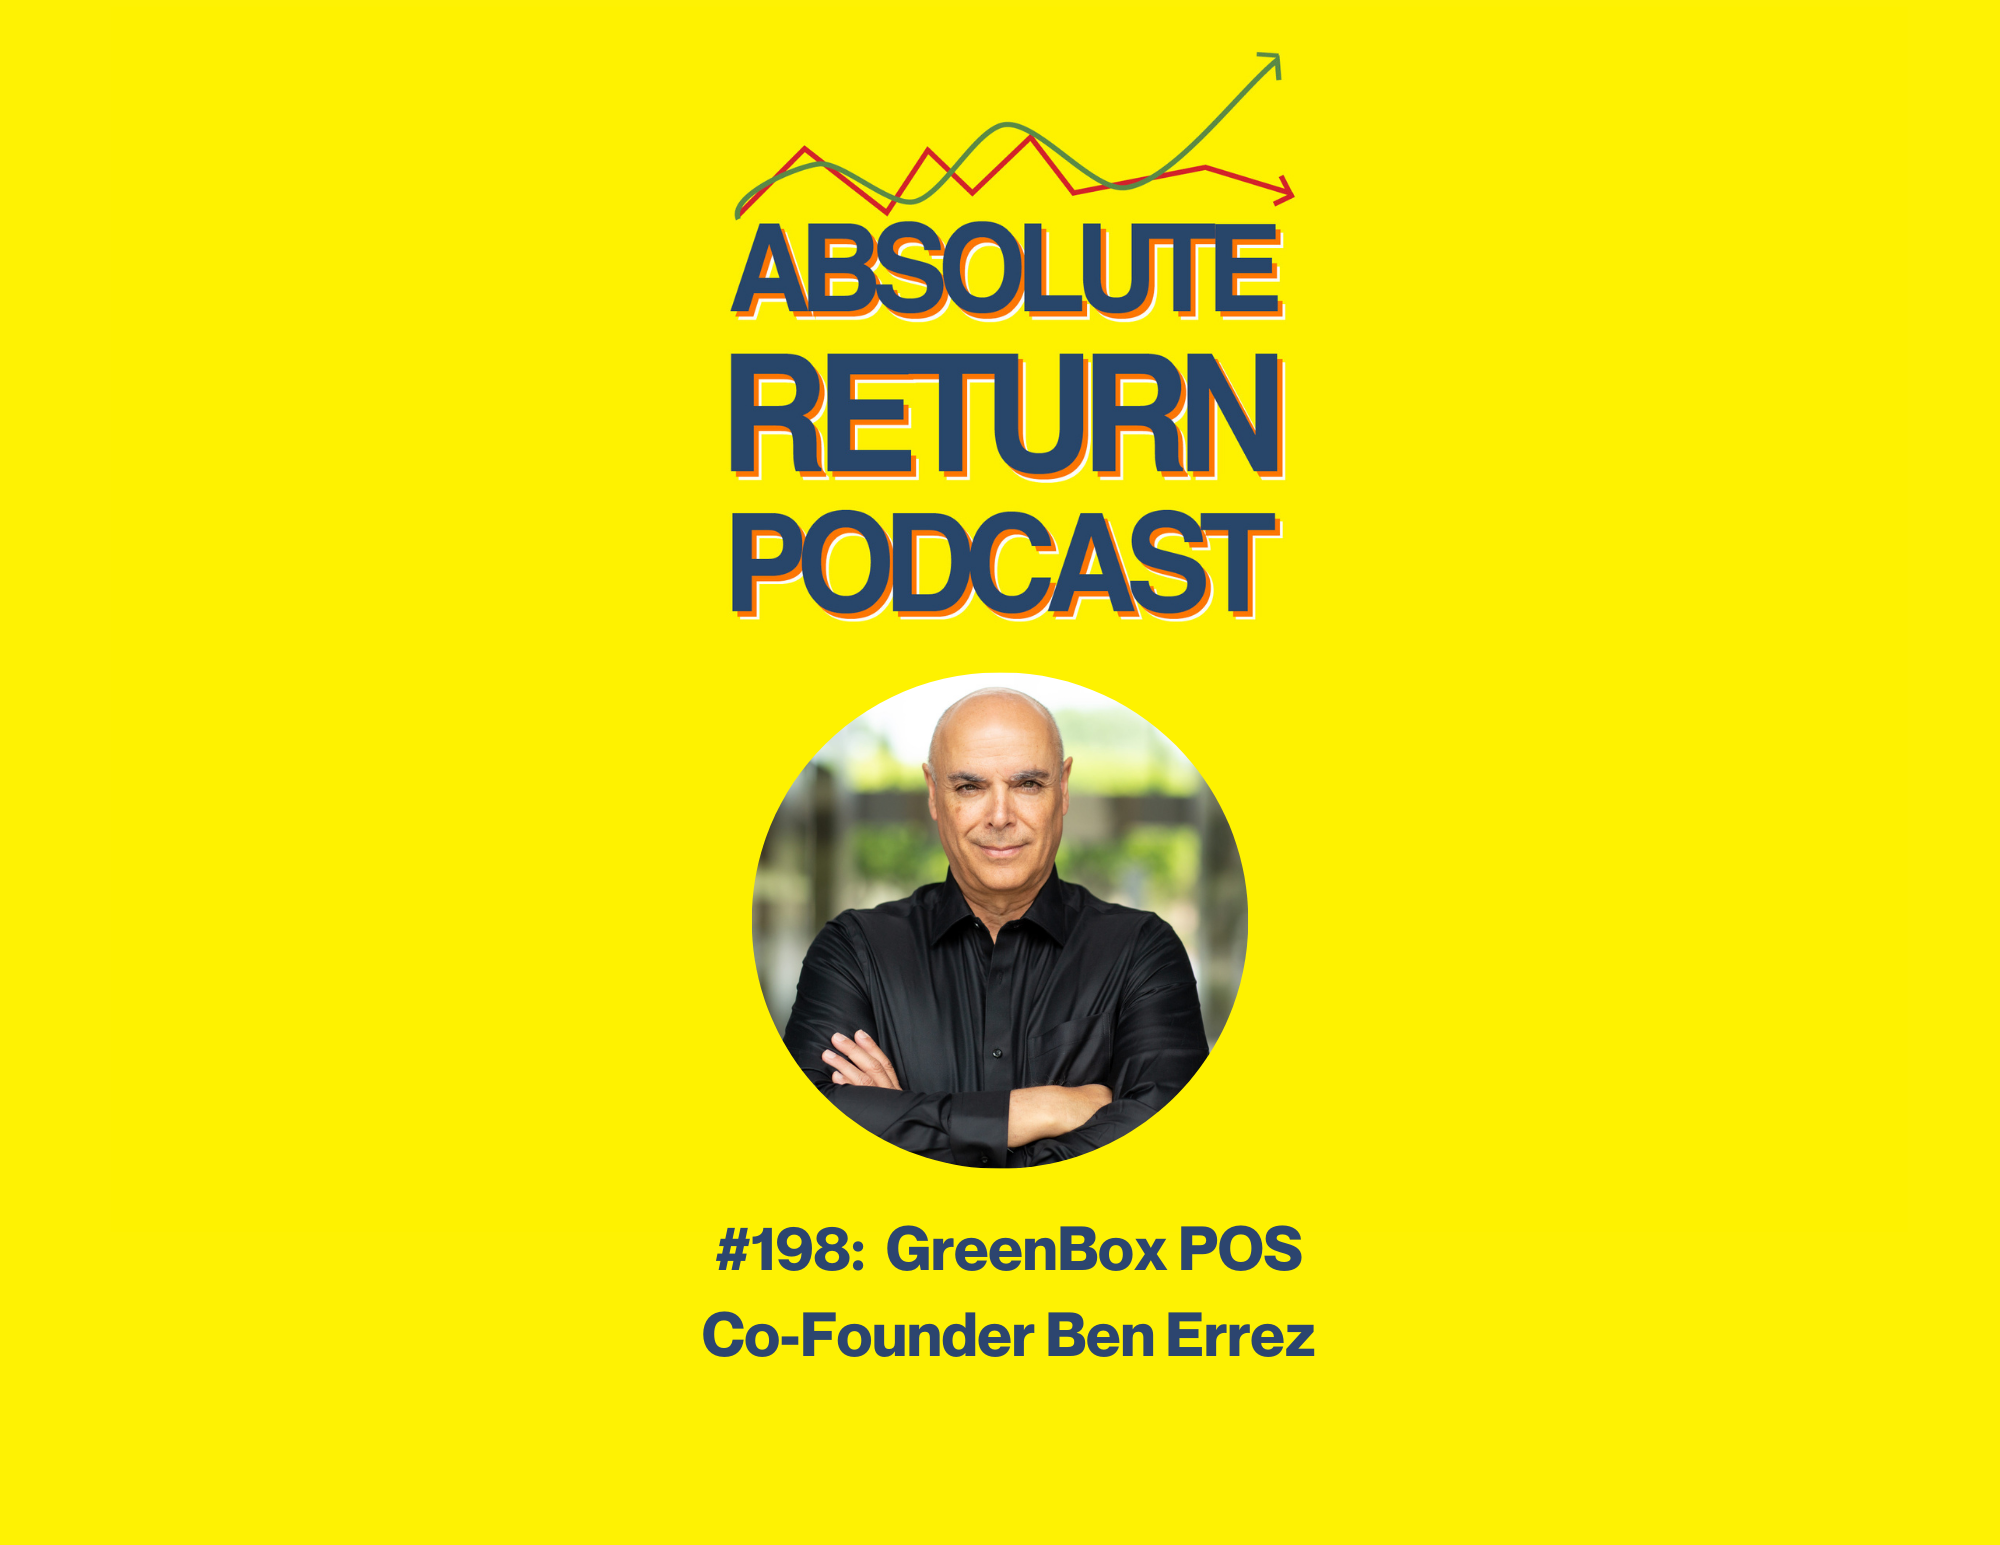 Absolute Return Podcast #198: Leadership Chat: GreenBox POS Co-Founder Ben Errez